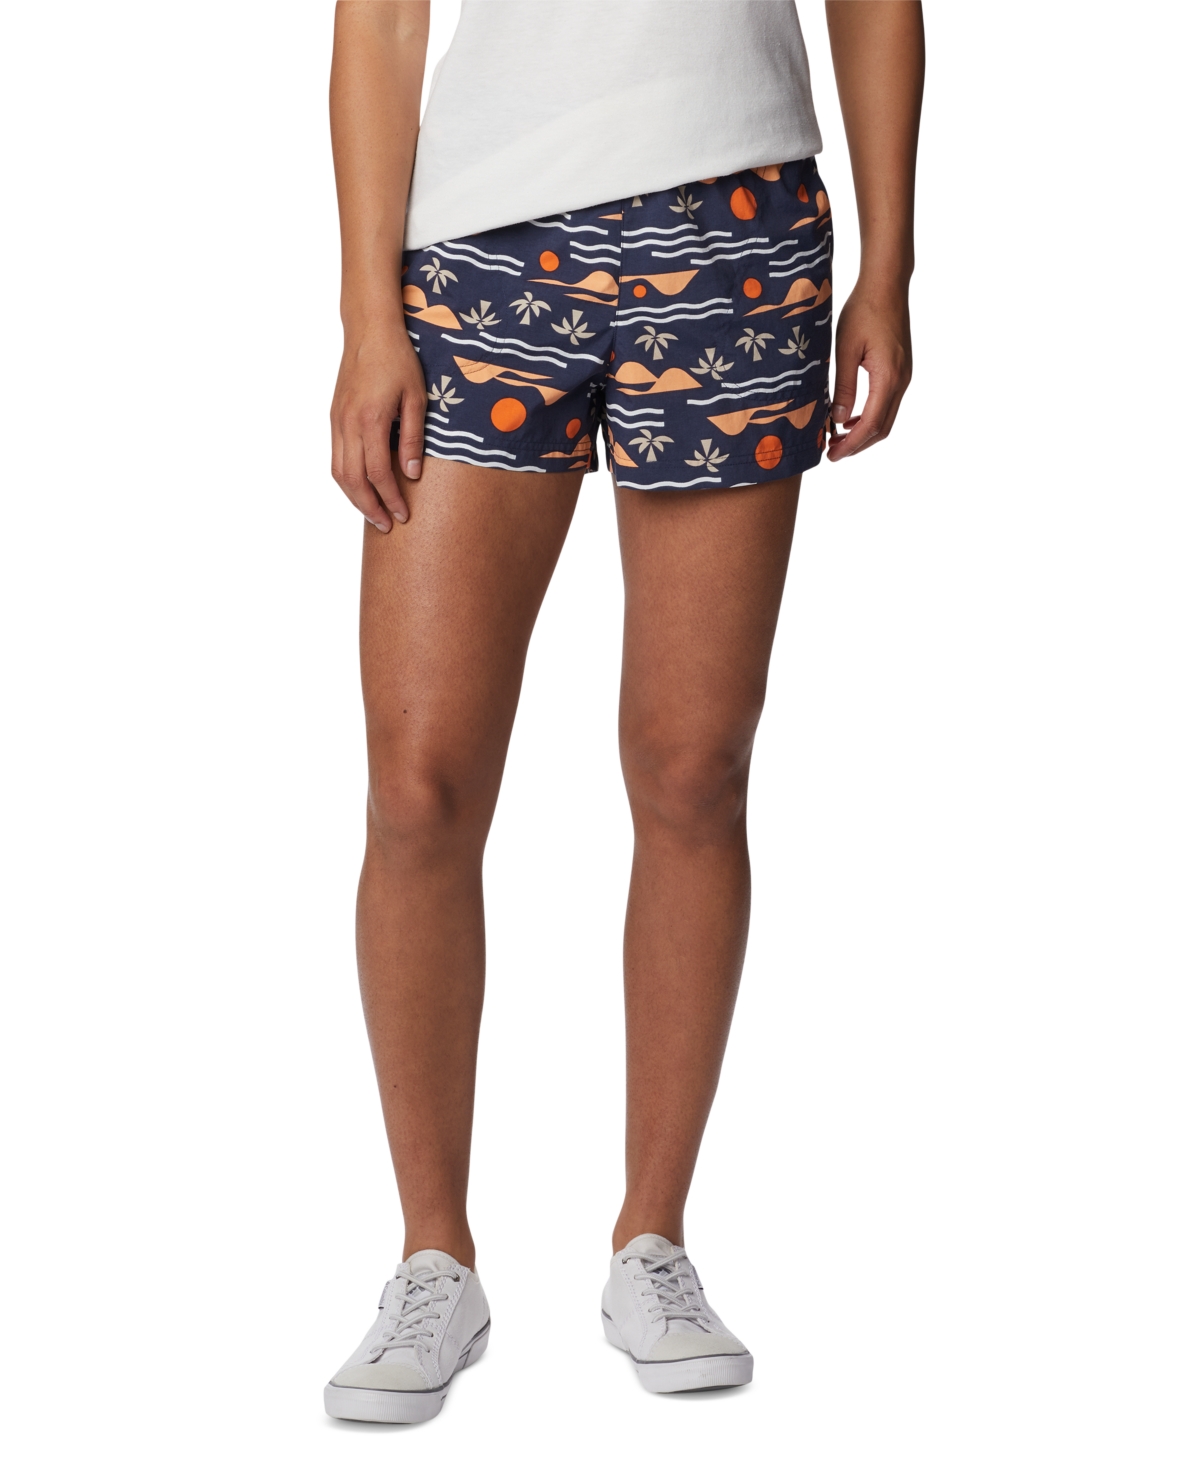 Columbia Women's Sandy River Ii Printed Mid-Rise Shorts - Nocturnal, Seas